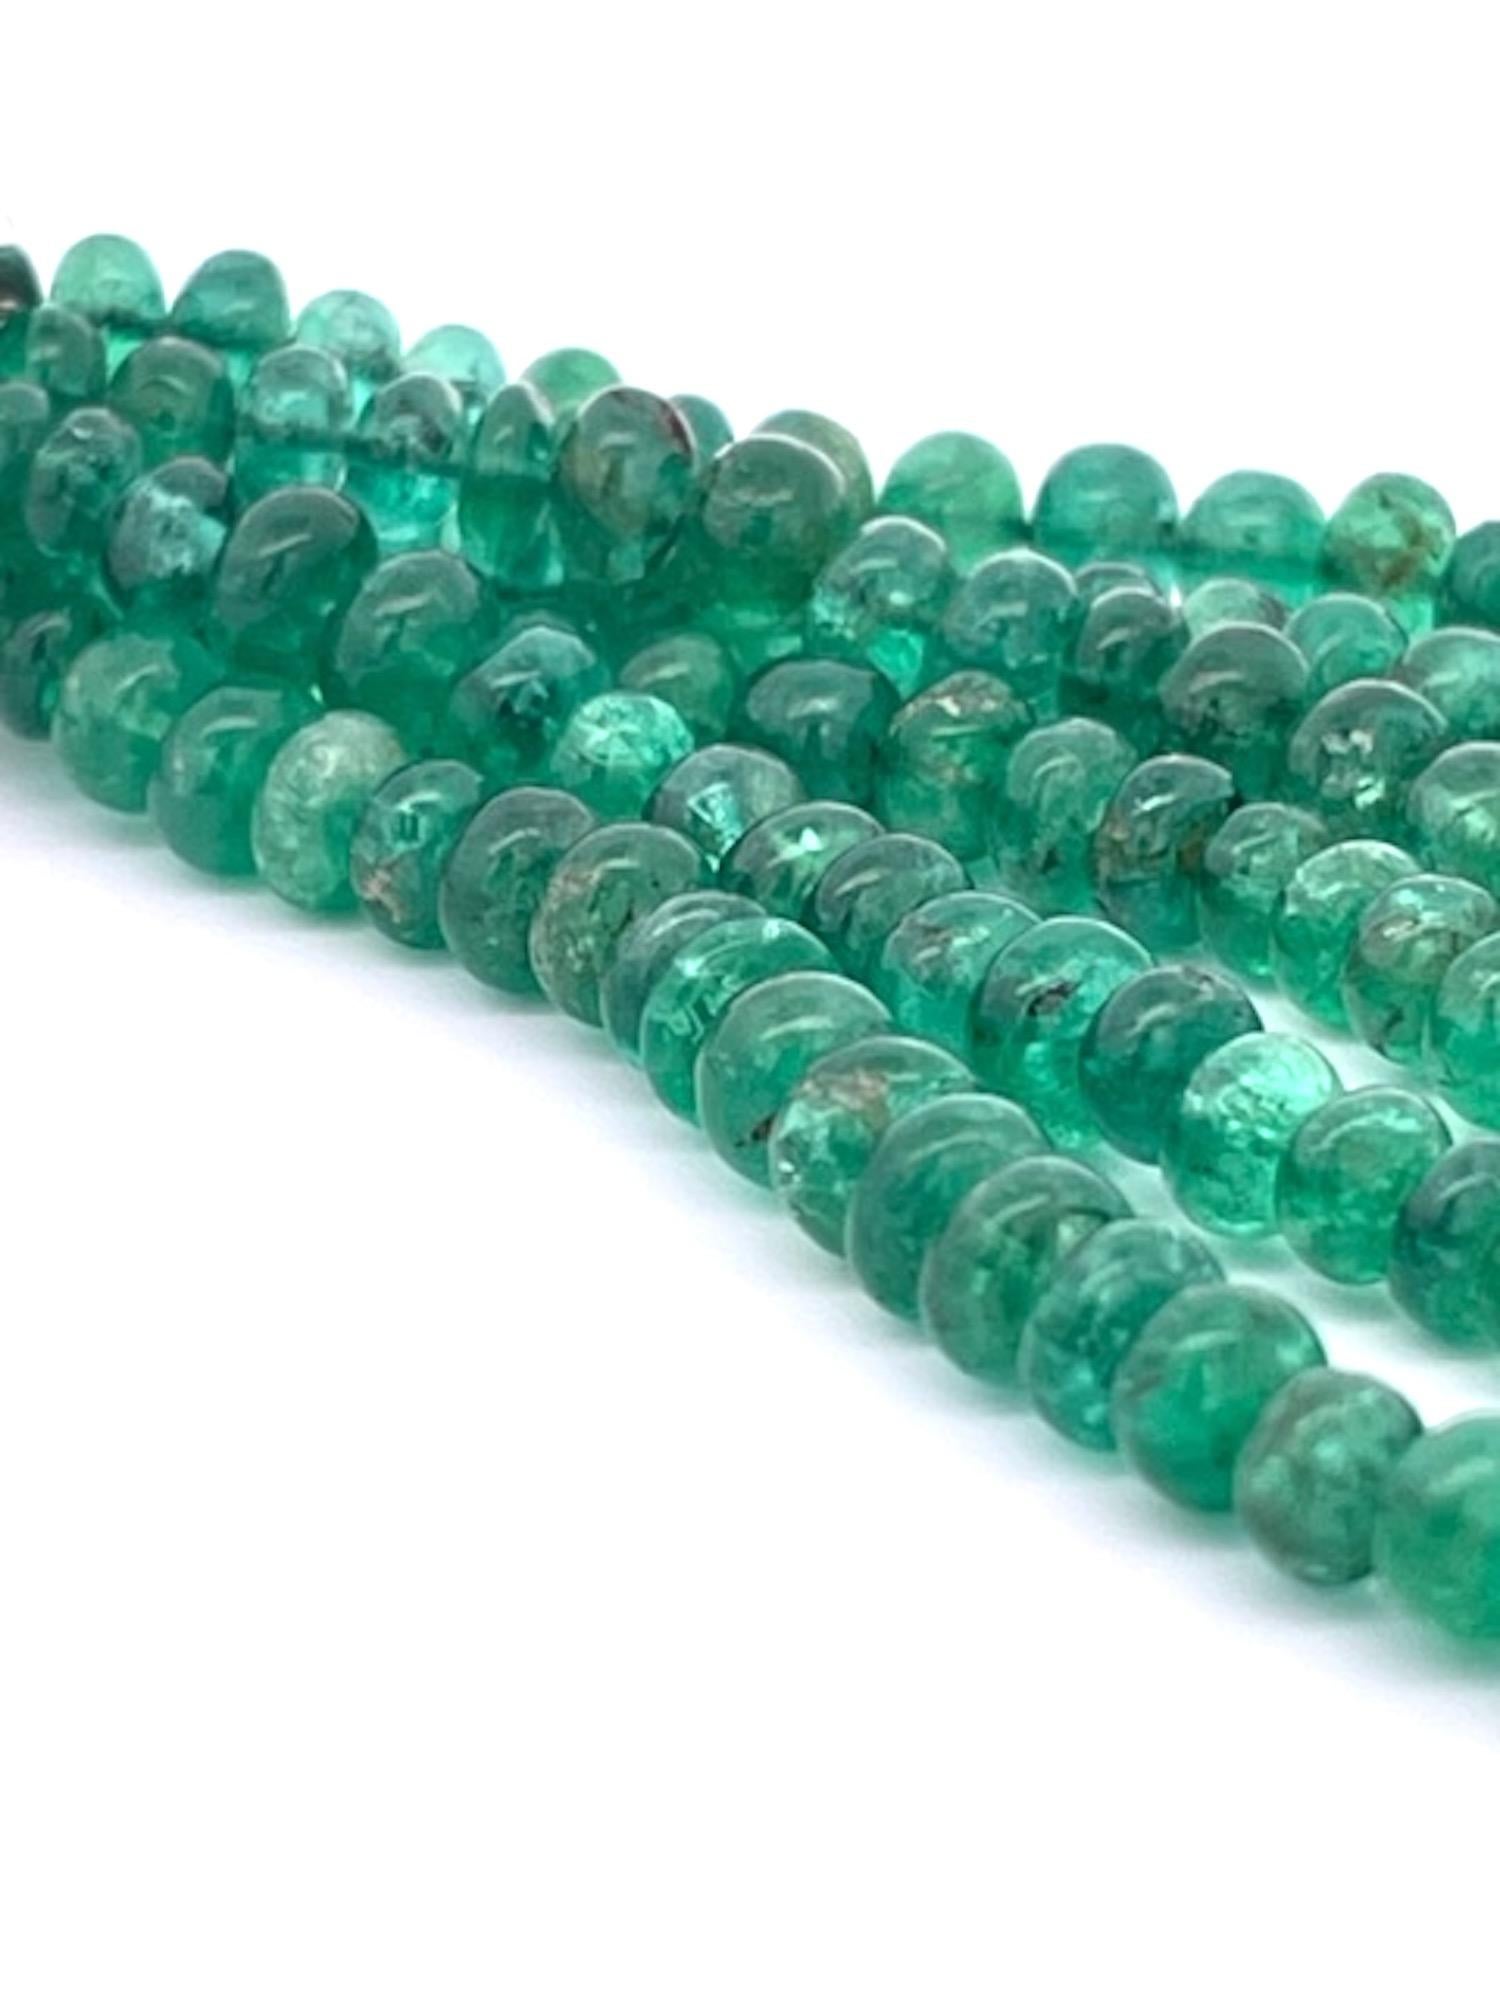 Rock Crystal Emerald Diamond Tassel  In Good Condition For Sale In North Hollywood, CA